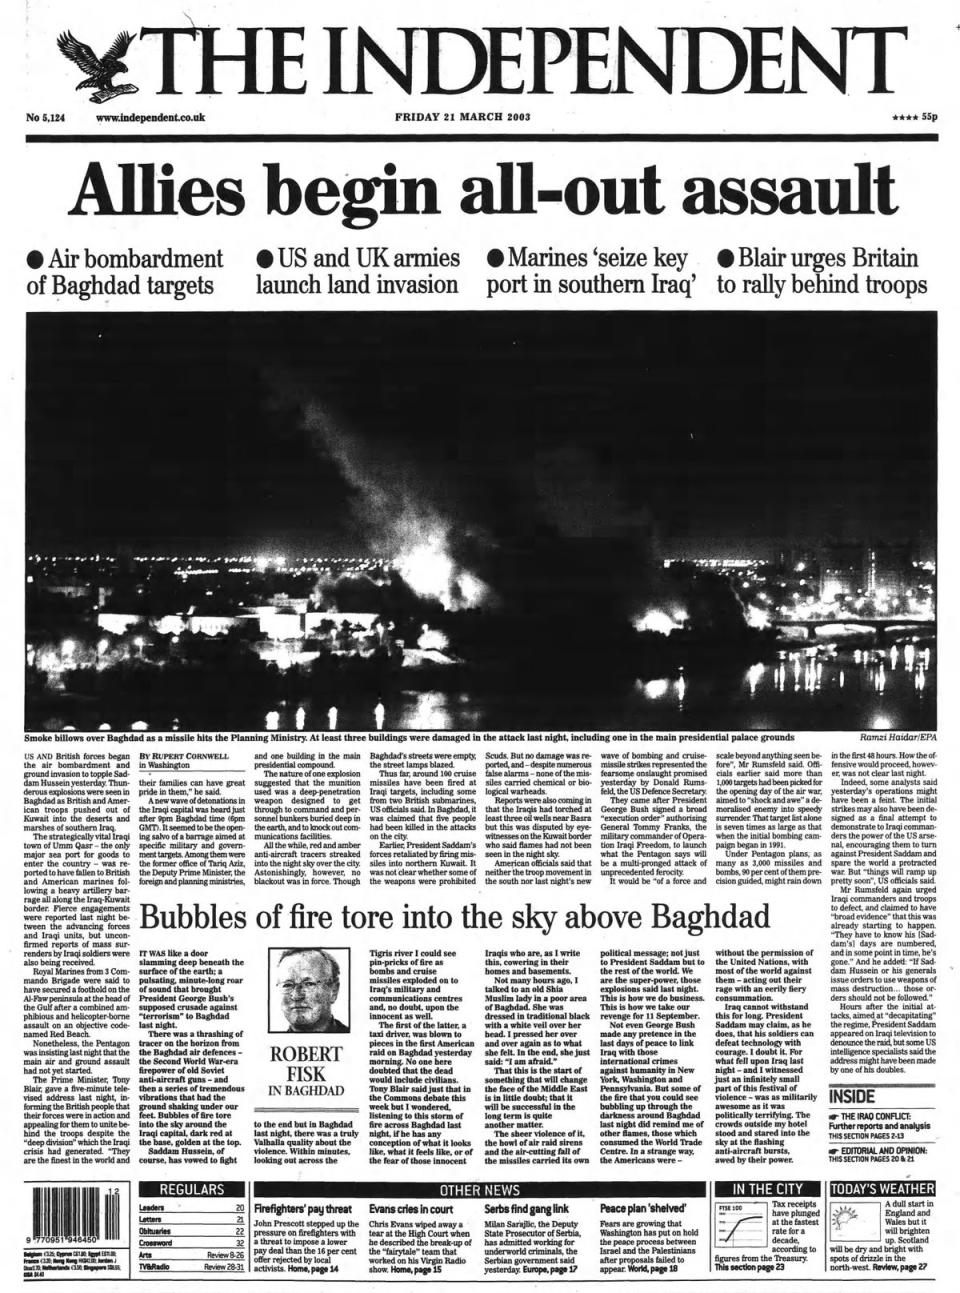 The Independent front page on 21 March 2003 (The Independent)